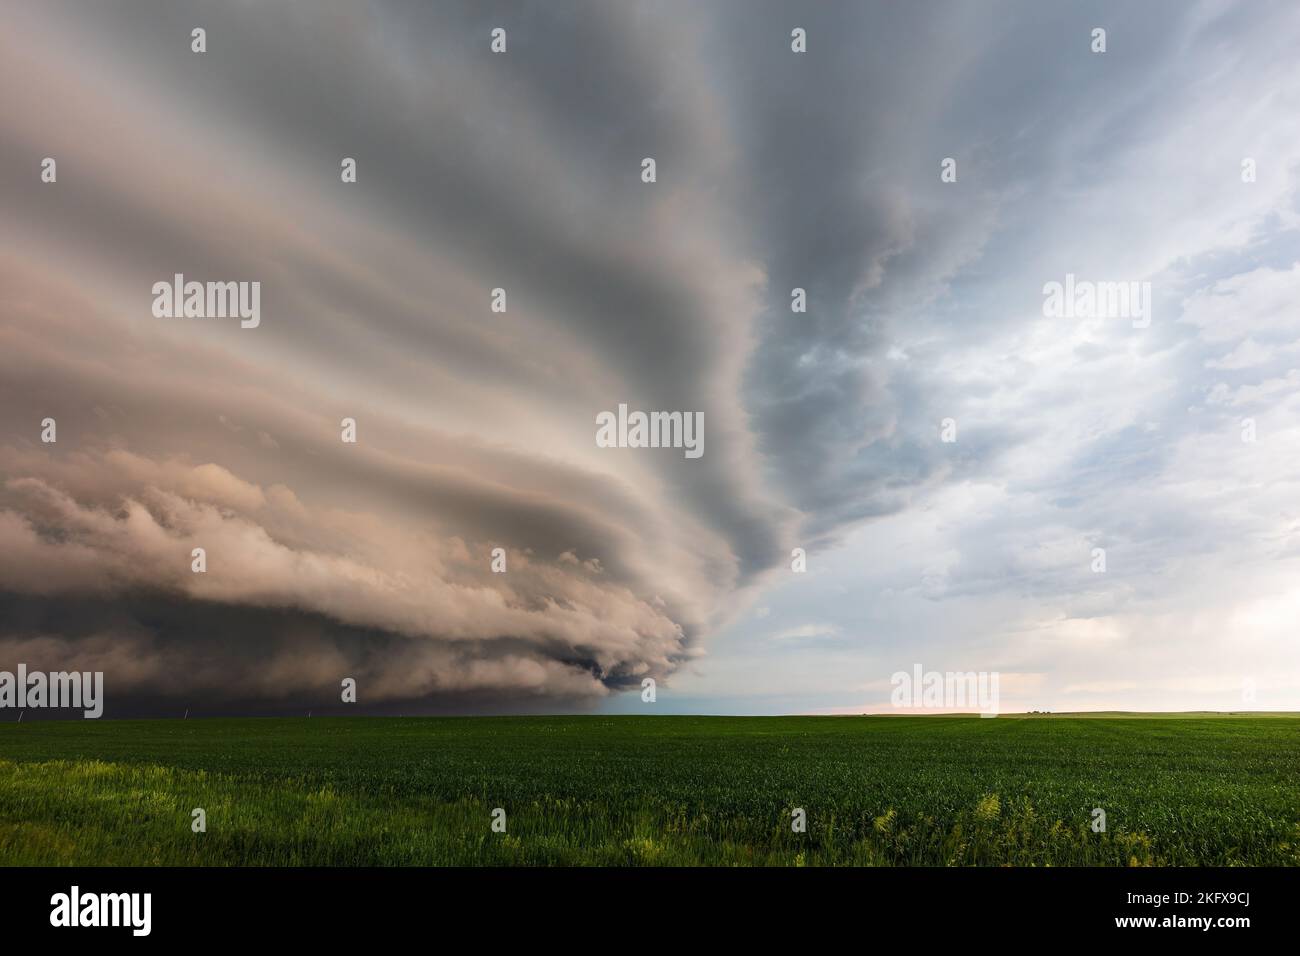 Ominous storm clouds ahead of a supercell thunderstorm near Wall, South Dakota Stock Photo